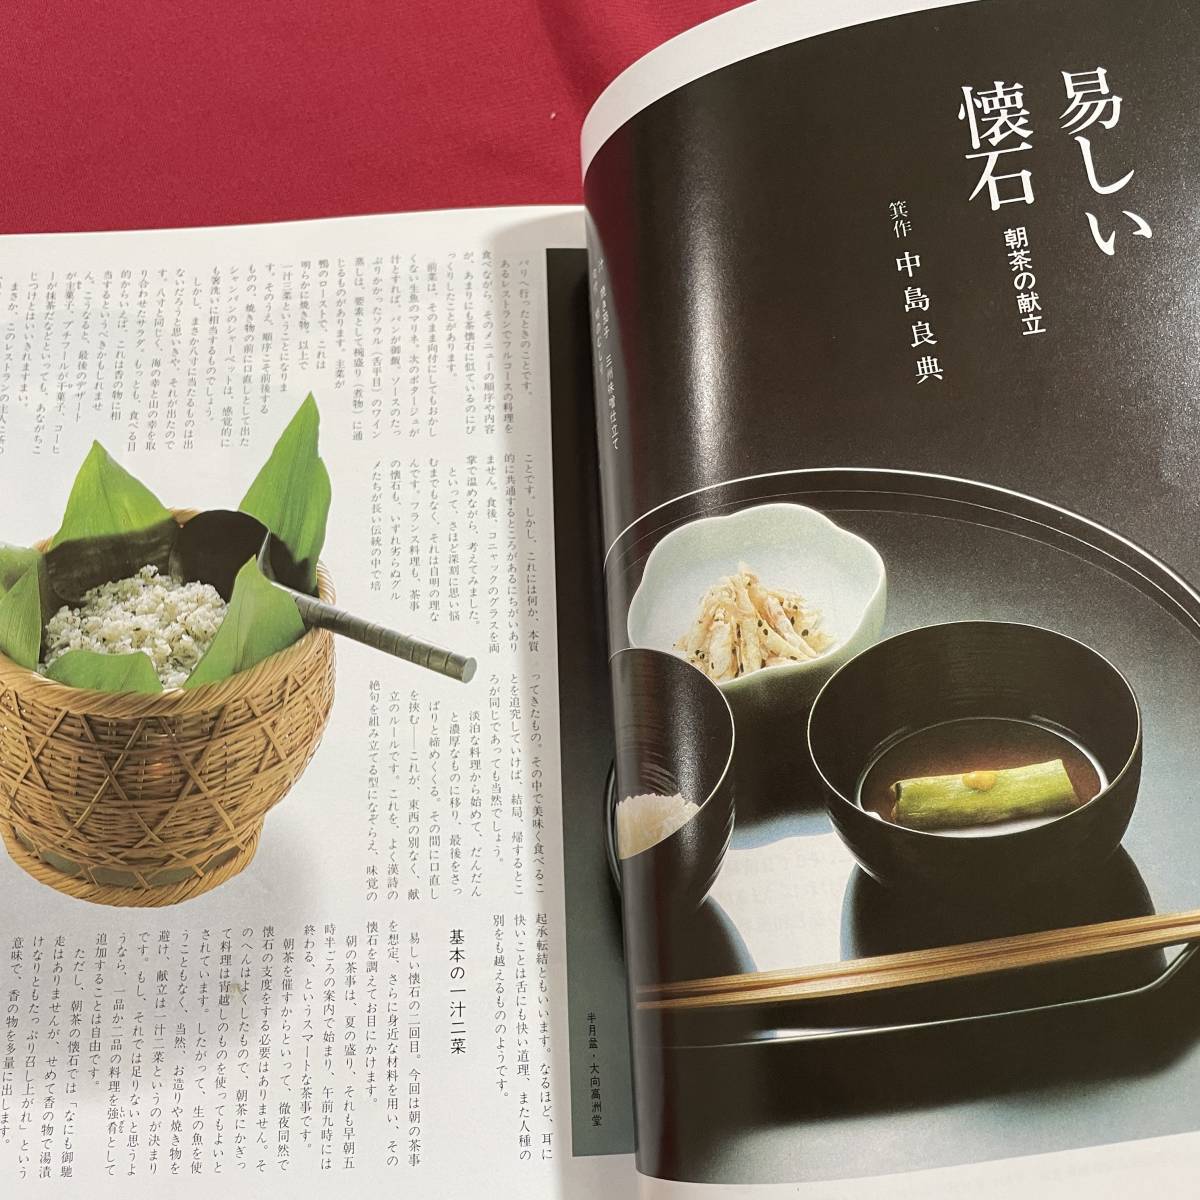  free shipping * four season. taste NO.38 summer * inside sunlight. French food morning tea. . stone unusual summer cooking curry rice 10 person 10 color * Showa era 57 year 